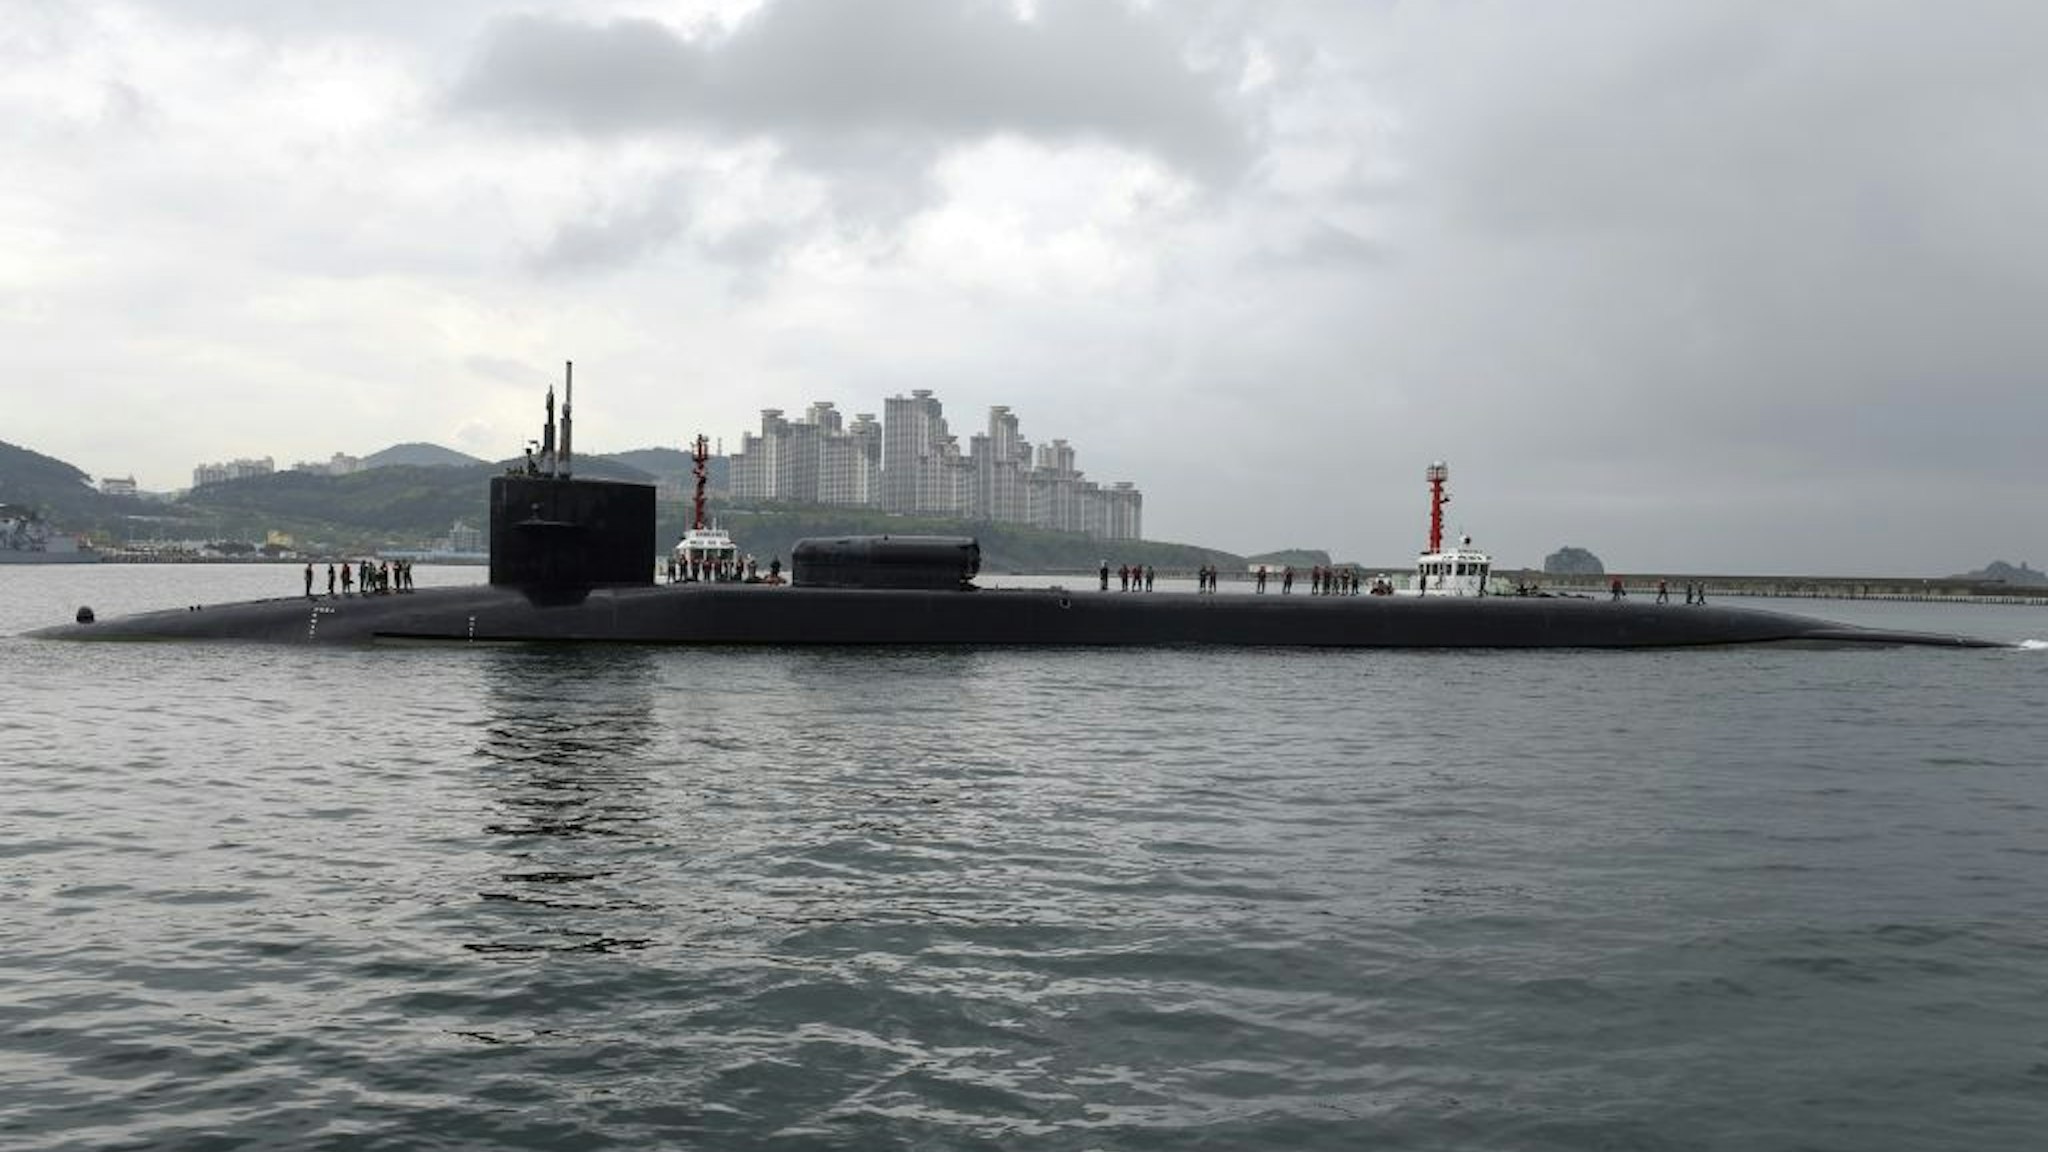 BUSAN, SOUTH KOREA - APRIL 25: In this handout photo provided by the U.S. Navy, the guided-missile submarine USS Michigan arrives on April 25, 2017 in Busan, South Korea. The USS Michigan is in South Korea for a scheduled port visit while conducting routine patrols throughout the western Pacific.